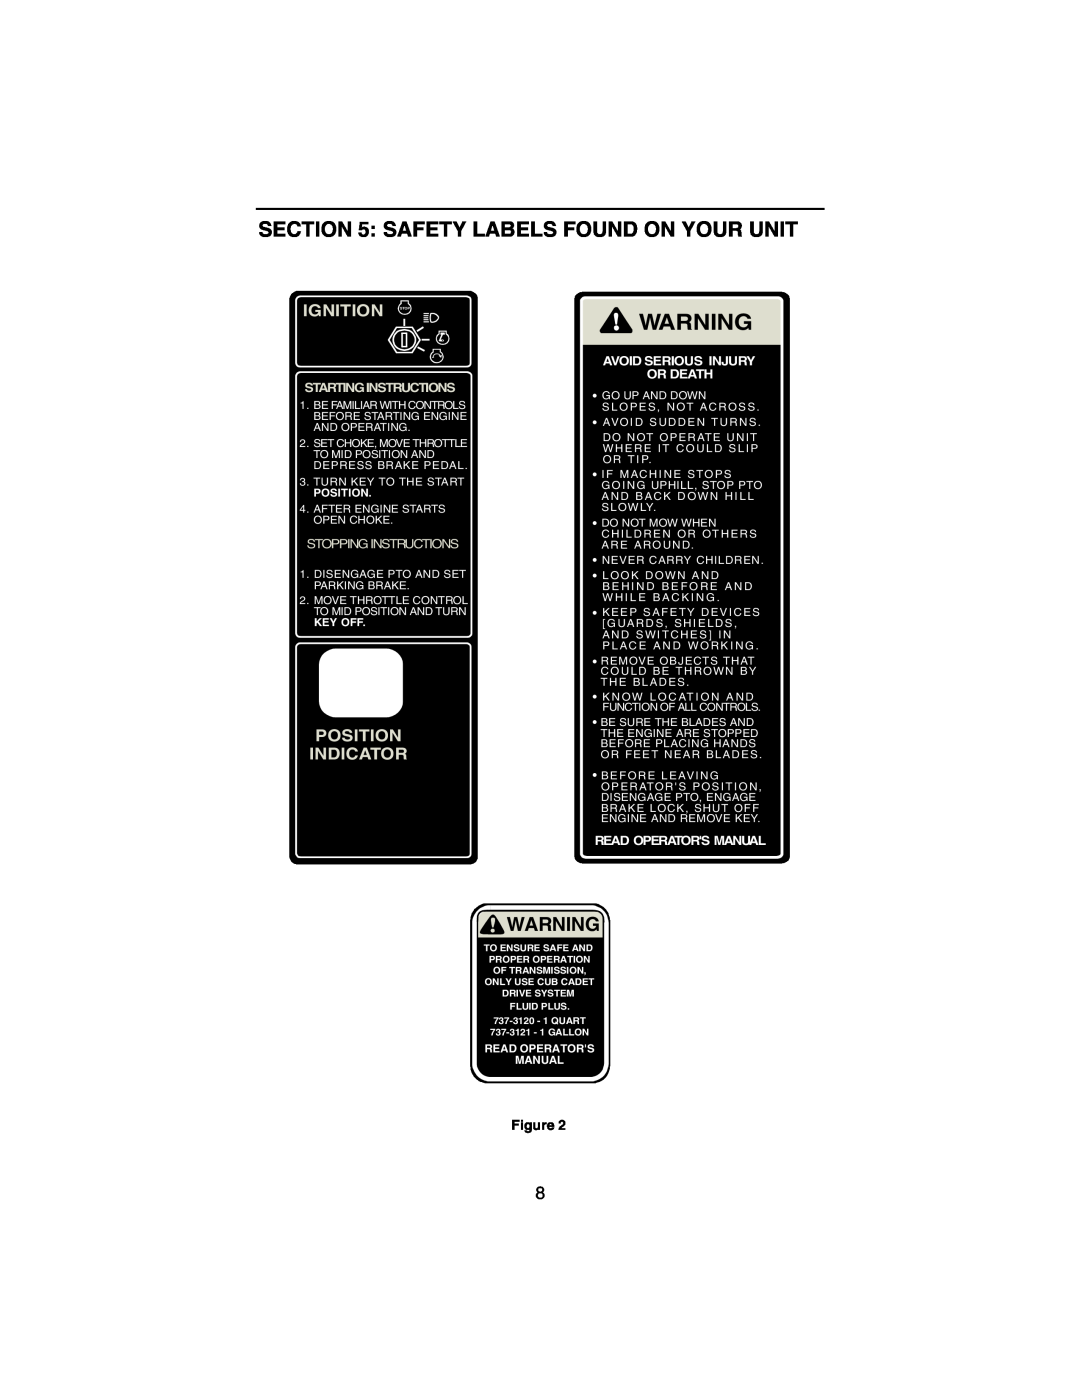 Cub Cadet 3184 manual Safety Labels Found On Your Unit, Ignition Stop, Position Indicator, Startinginstructions, Key Off 